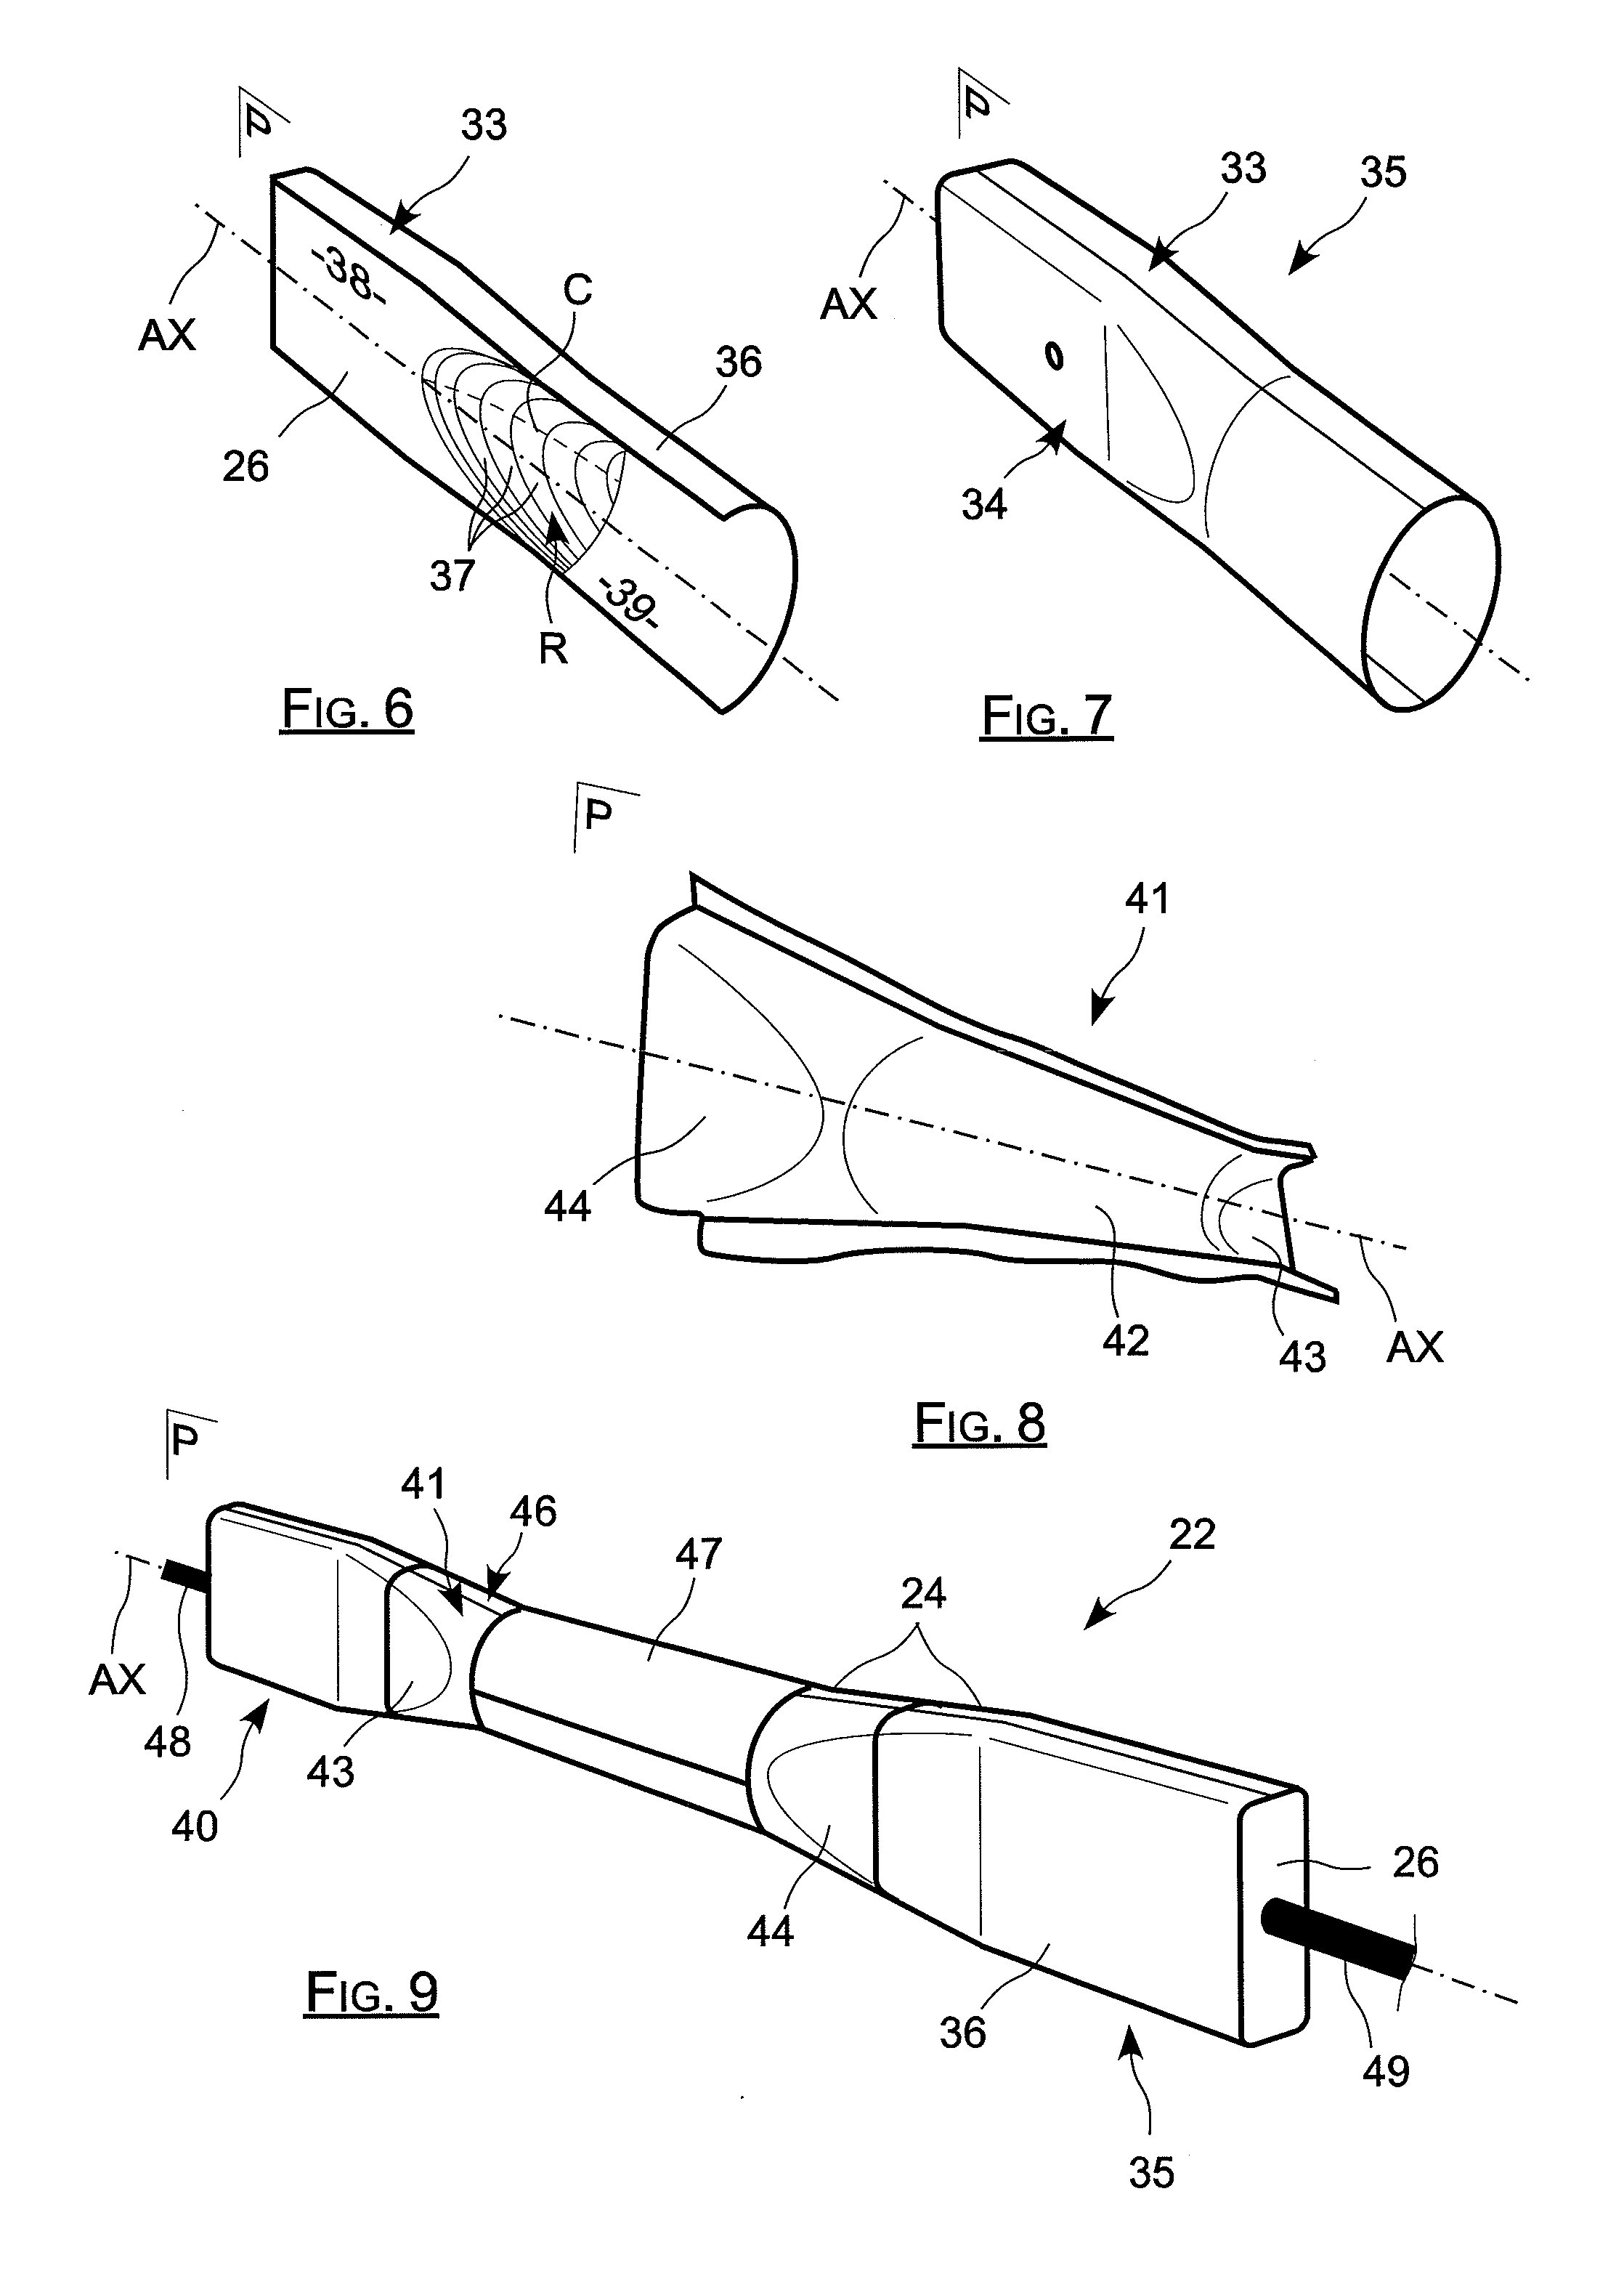 Method for manufacturing a composite material connecting rod having reinforced ends